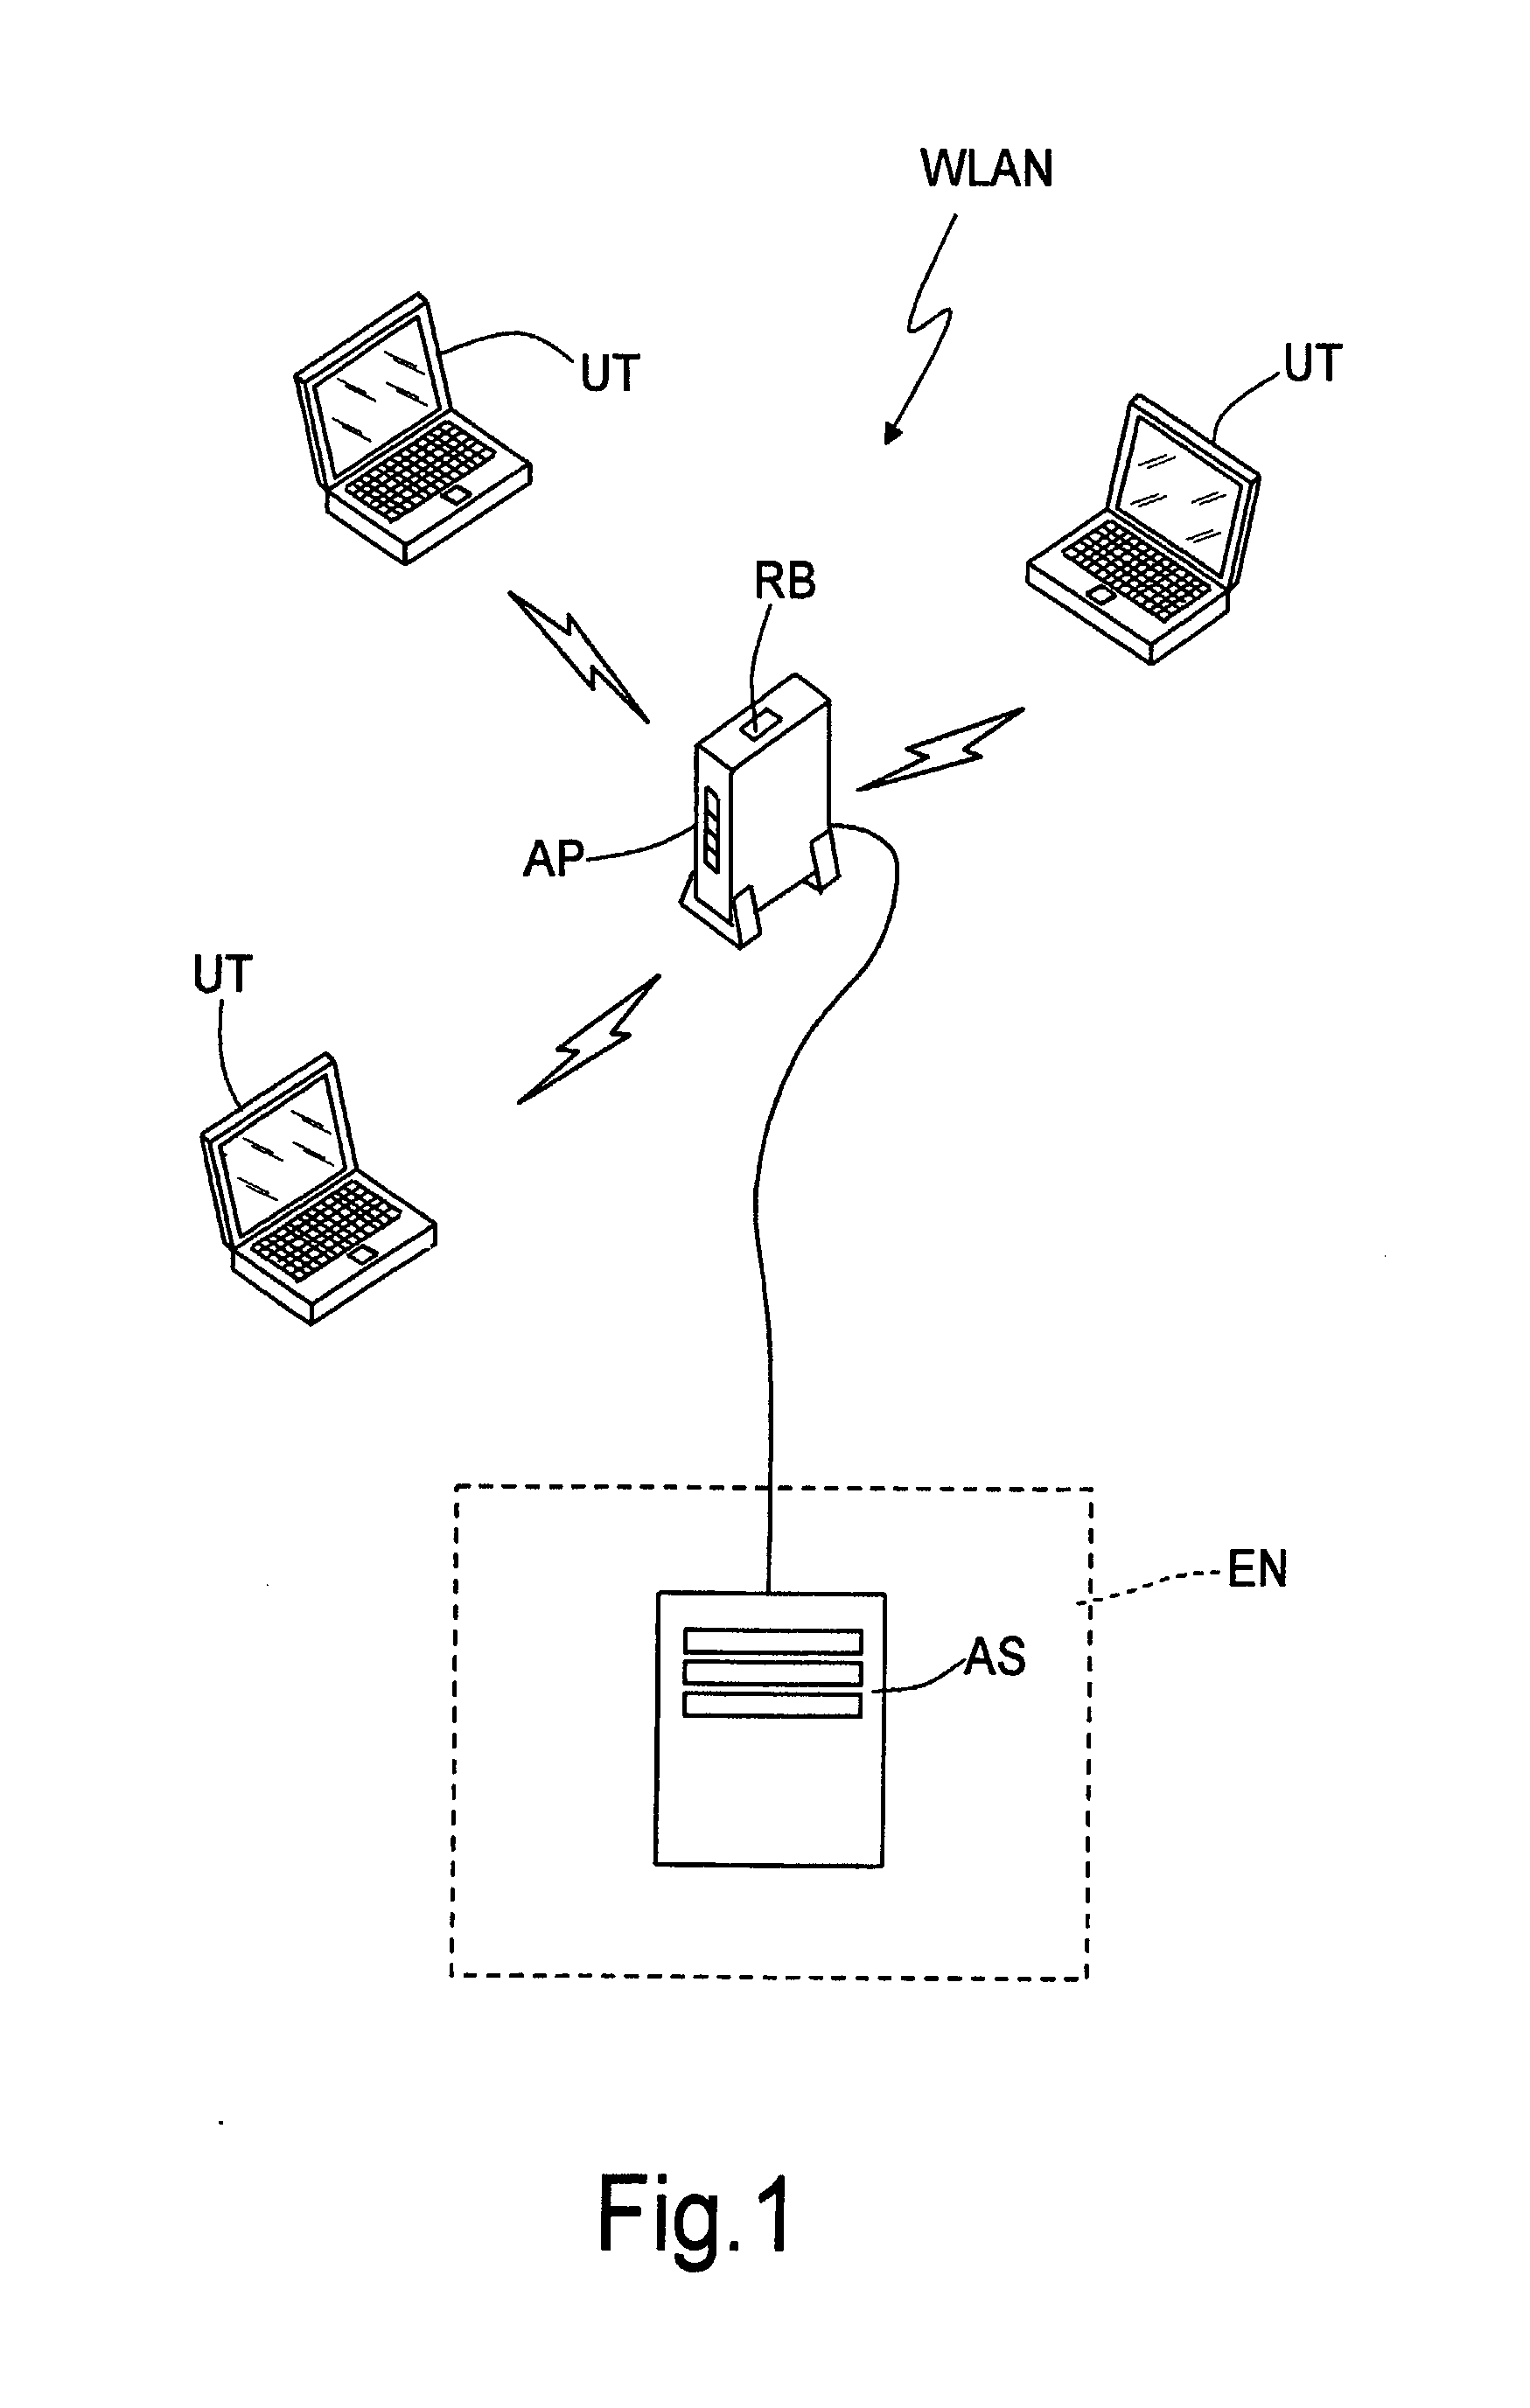 Method for Enrolling a User Terminal in a Wireless Local Area Network